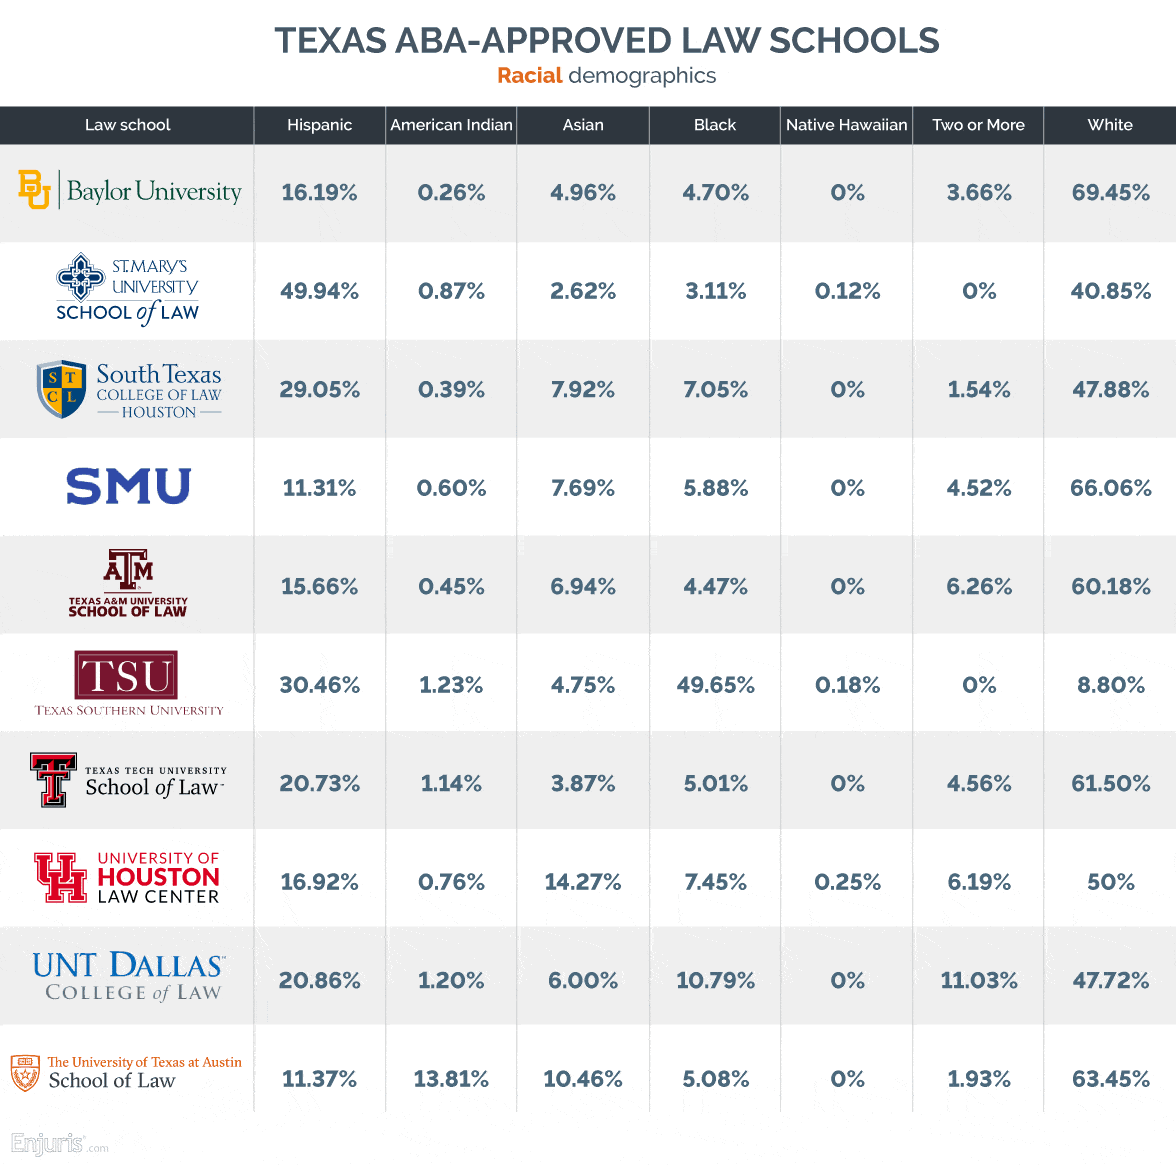 Texas ABA-approved law schools by racial demographics